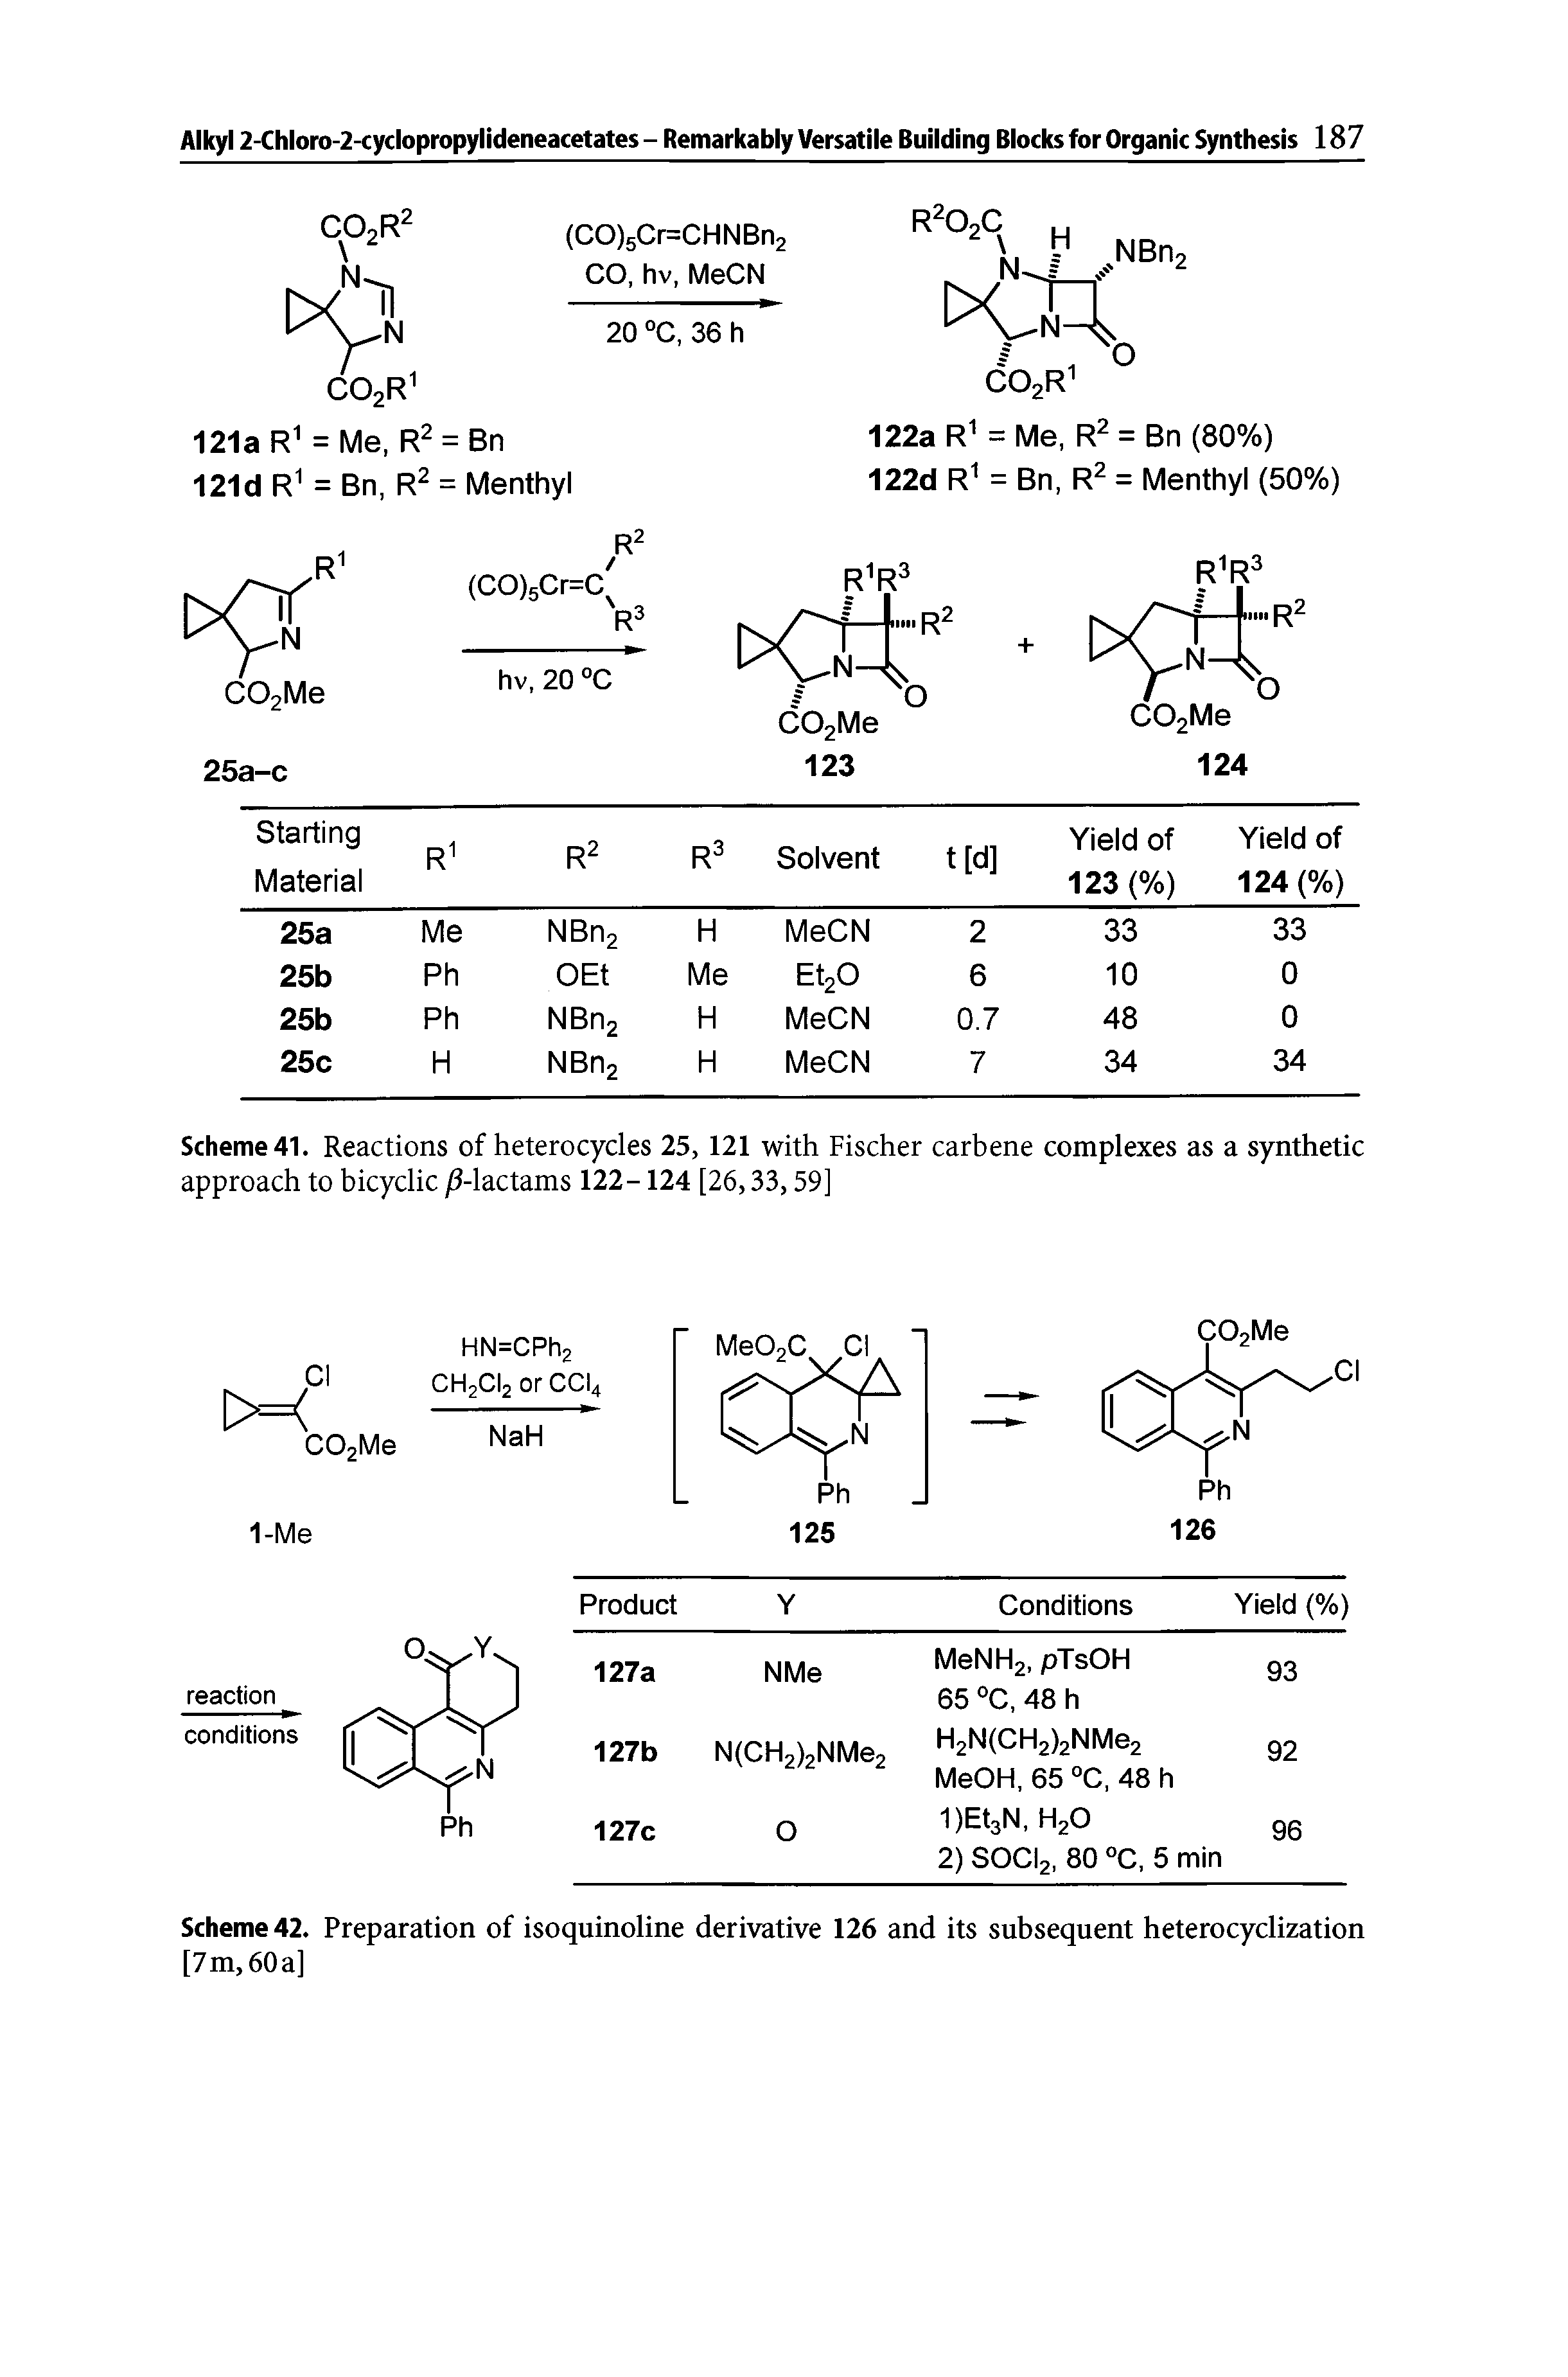 Scheme 41. Reactions of heterocycles 25, 121 with Fischer carbene complexes as a synthetic approach to bicyclic j0-lactams 122-124 [26,33,59]...